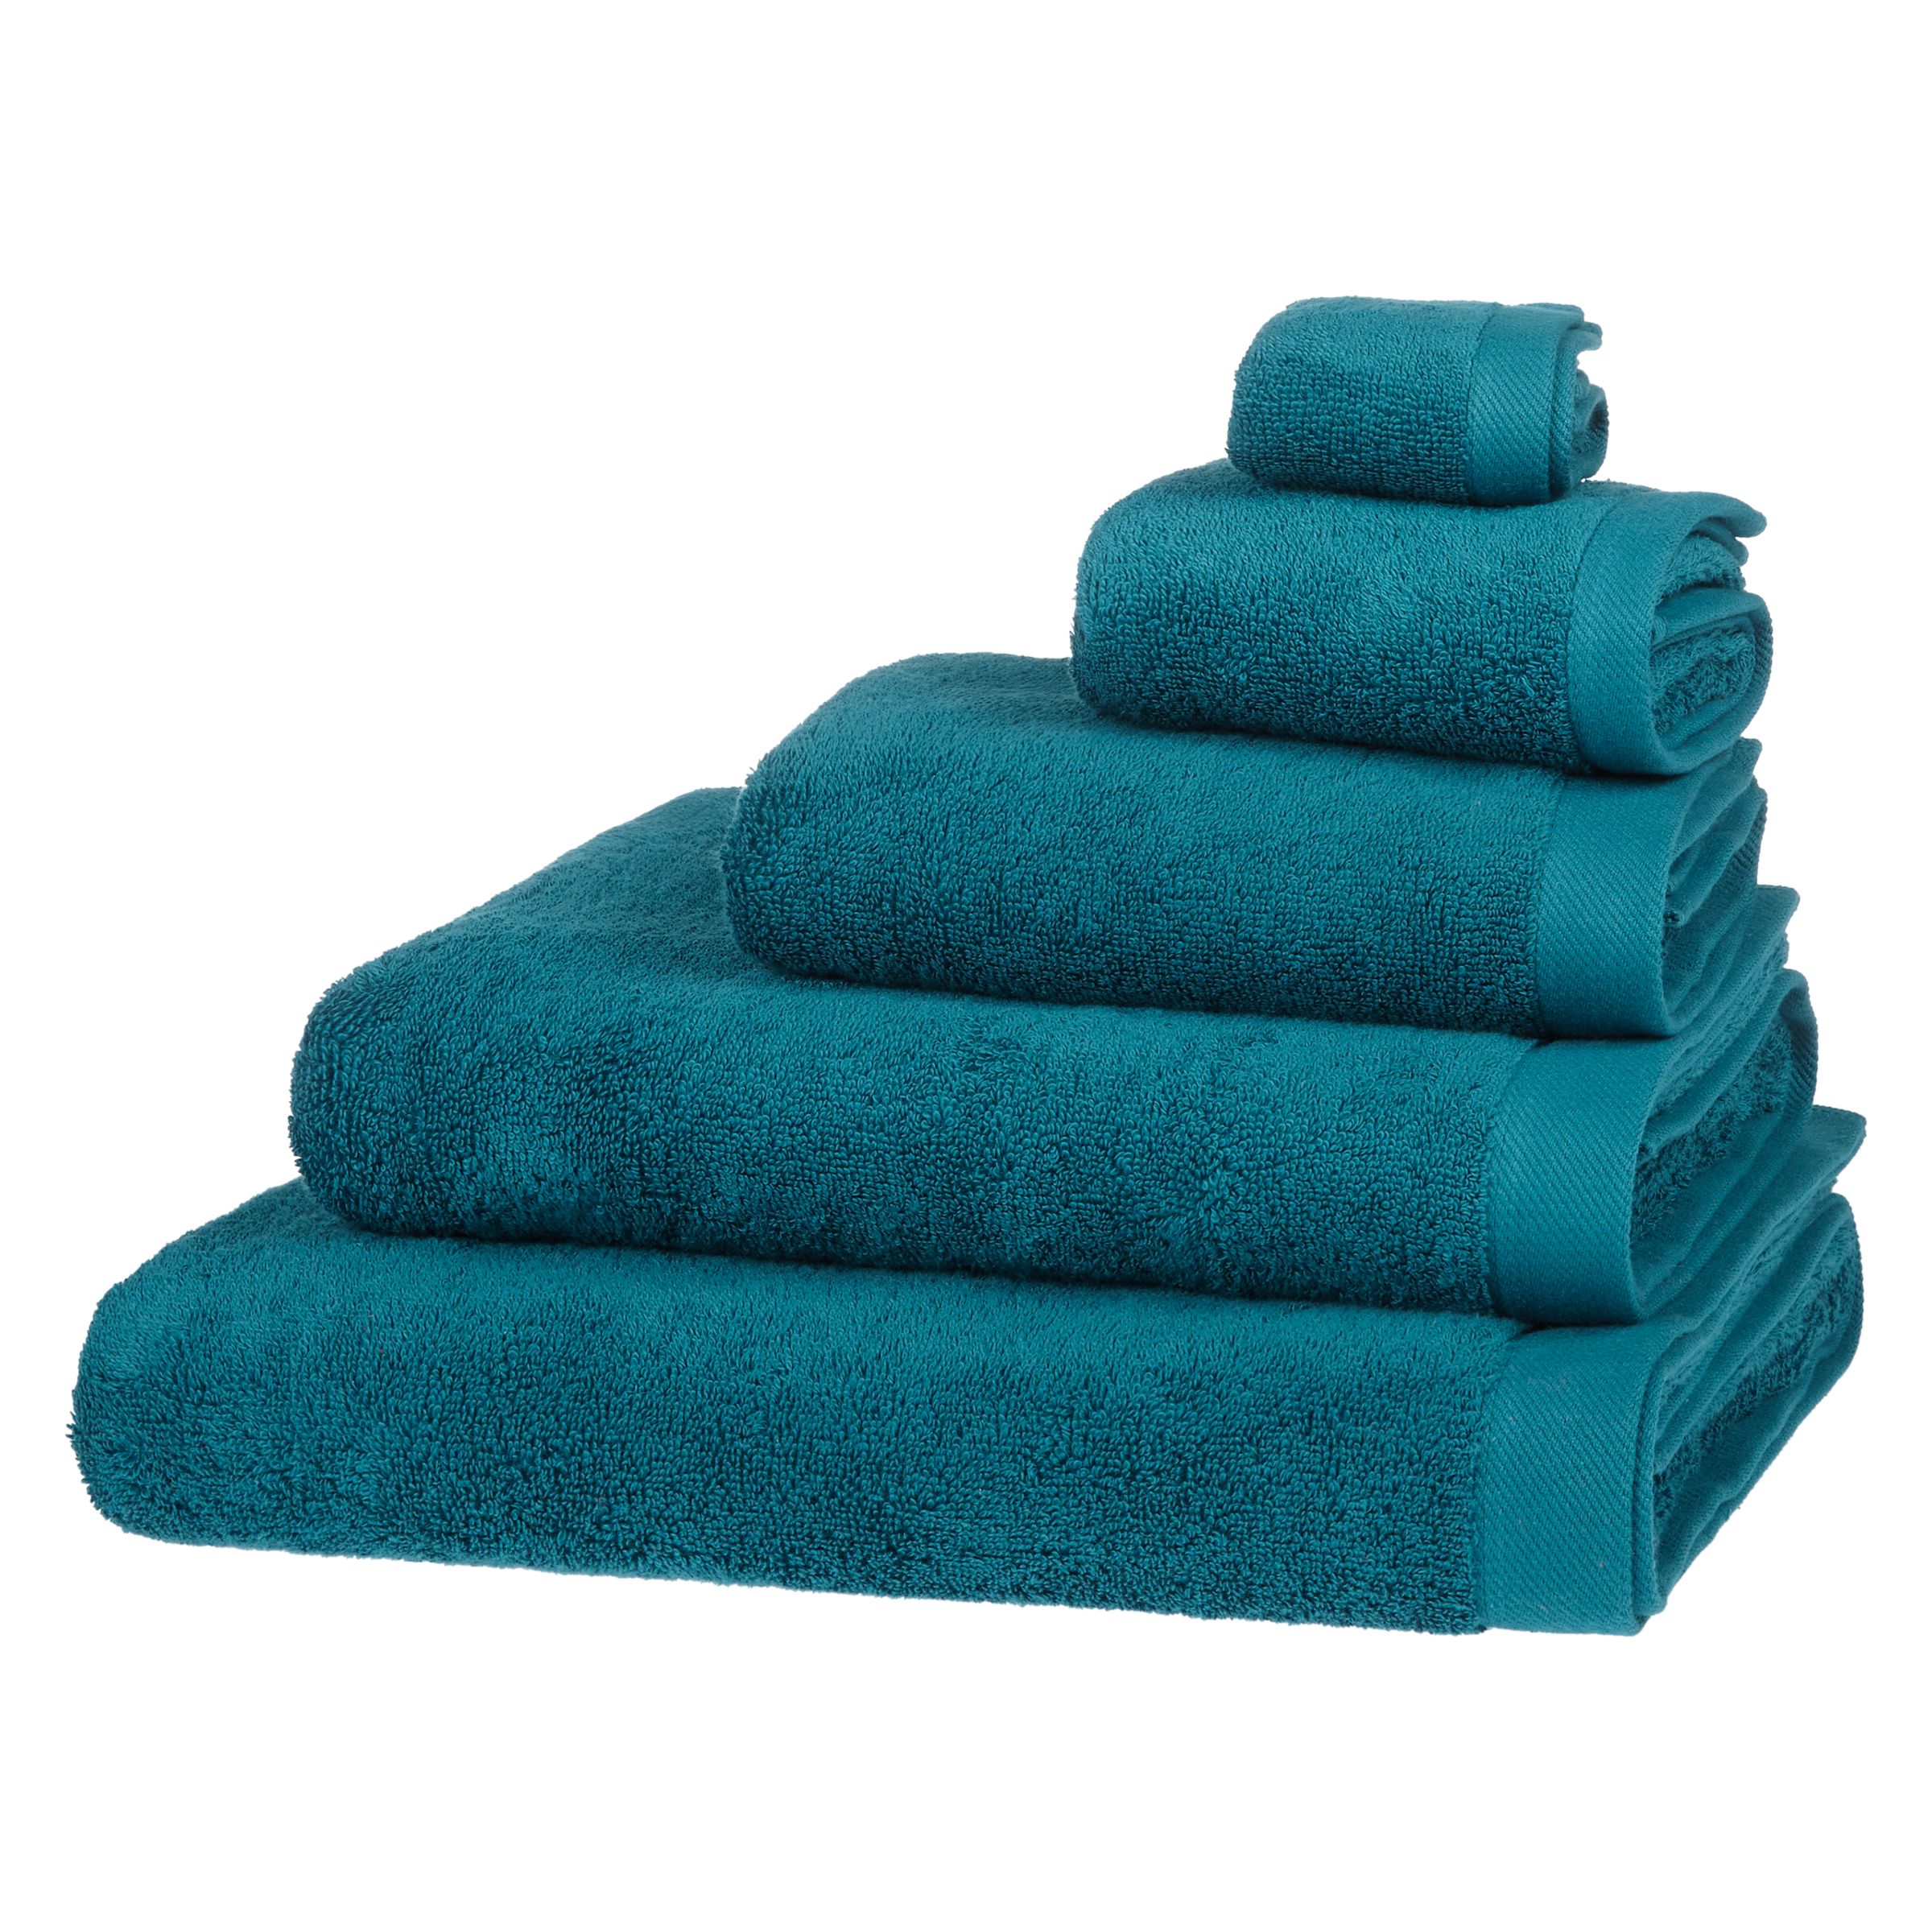 House by John Lewis Towels, Teal